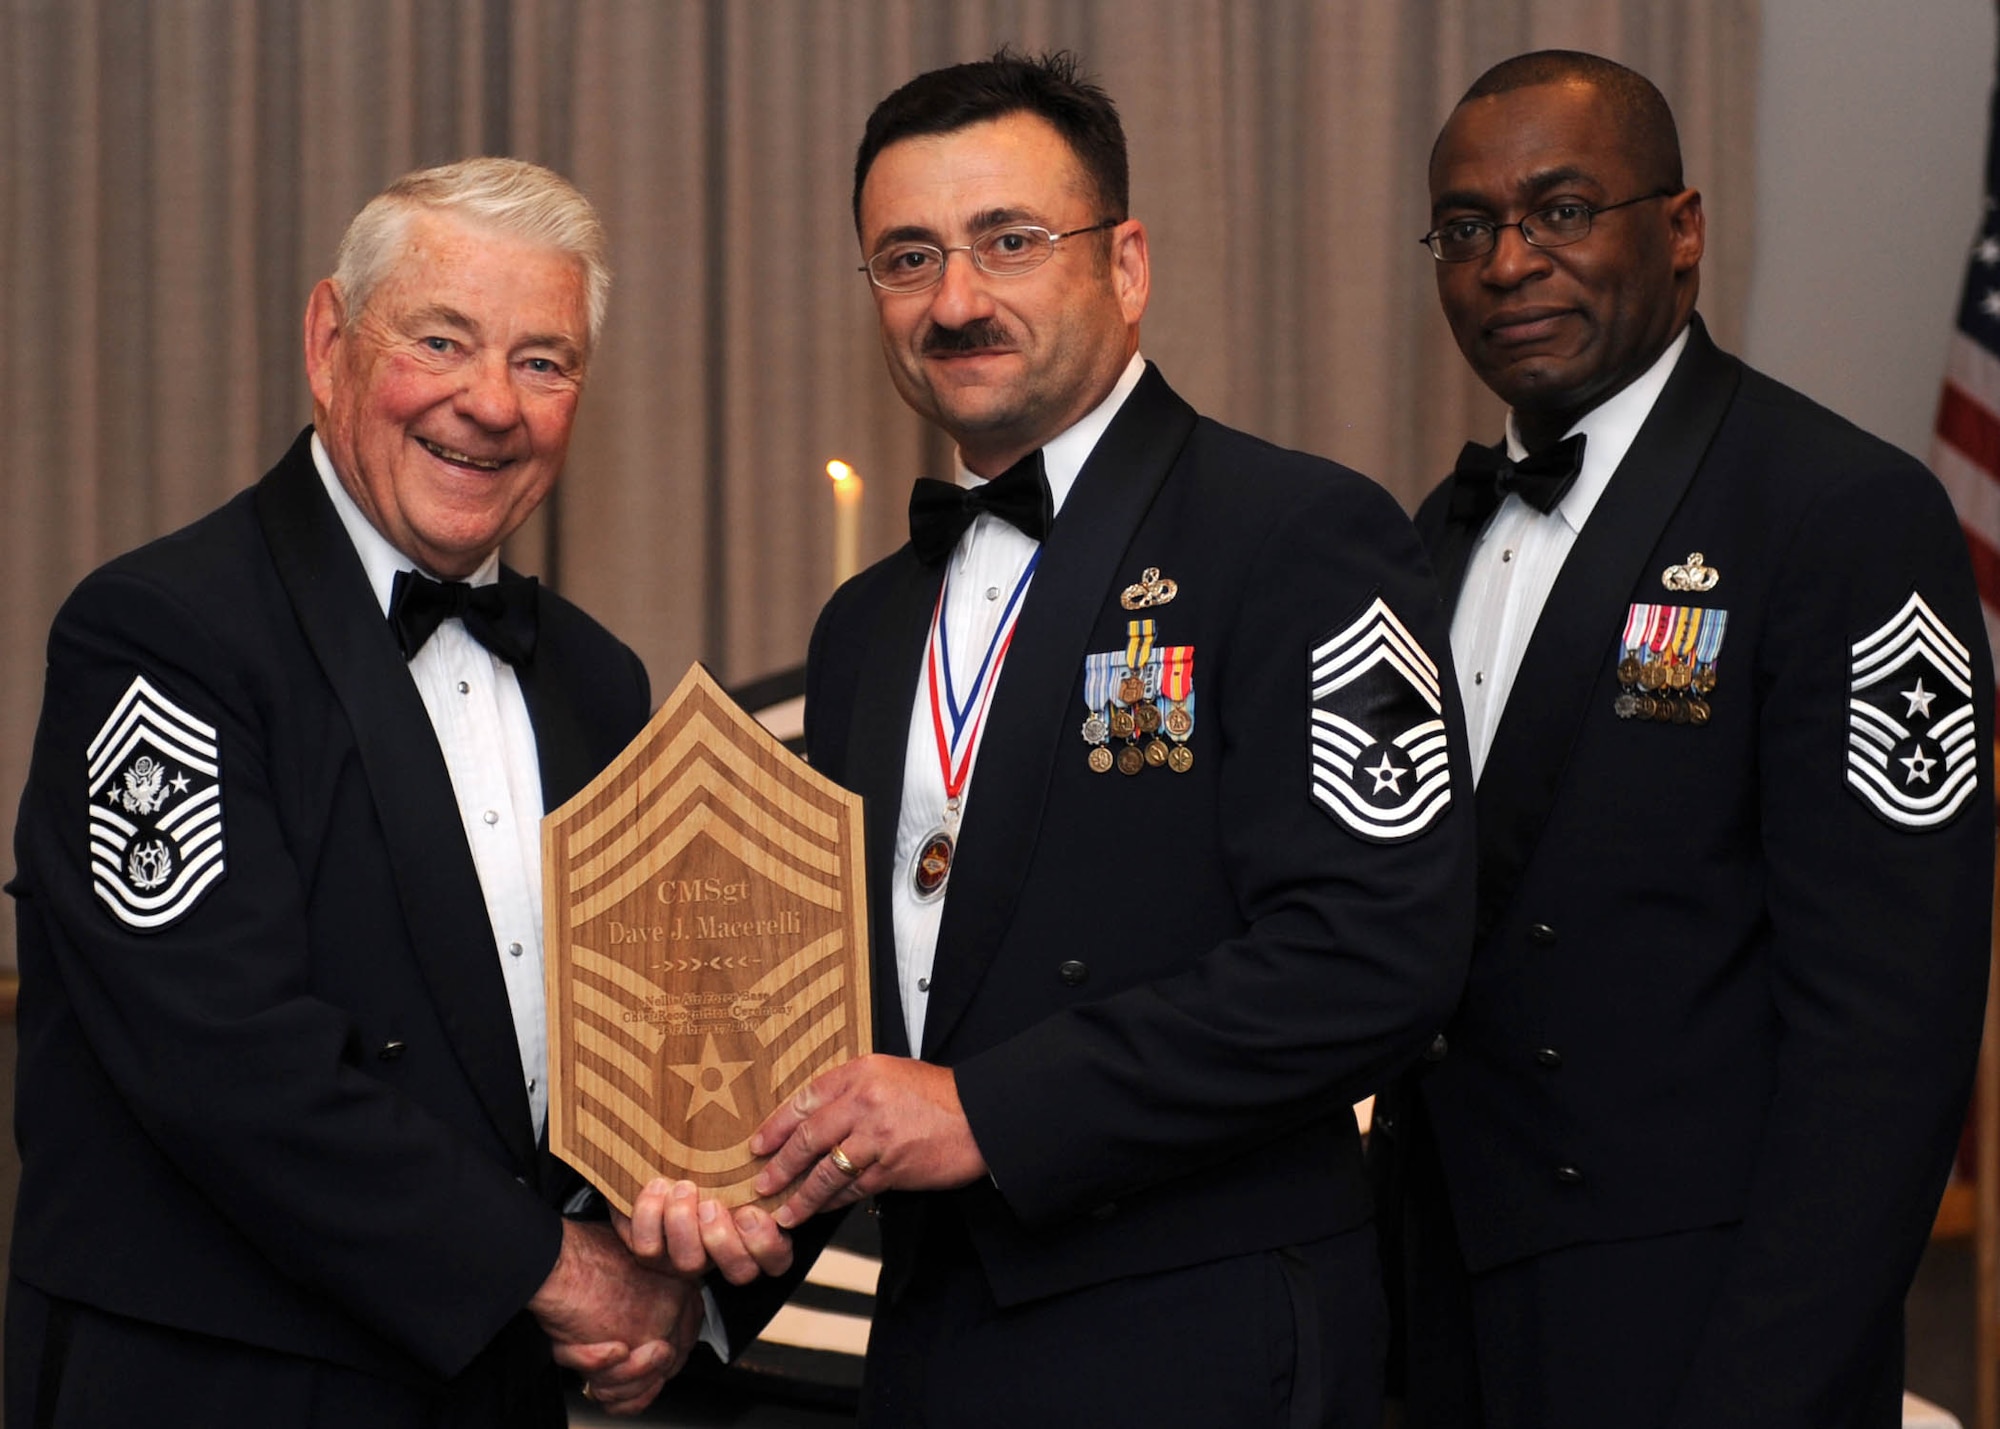 Chief Master Sergeant Macerelli, 926th Group maintenance superintendent (center), is presented with a memento by Chief Master Sergeant (retired) Robert D. Gaylor (left), and 99th Air Base Wing Command Chief Master Sergeant Alfred Herring during the Chief Master Sergeant Recognition ceremony Feb. 26. Chief Macerelli is the 926th GP's newest senior non-commissioned officer to join the top one percent of the enlisted force promoted to the rank of chief. (U.S. Air Force photo/Staff Sgt. Erin Worley)
